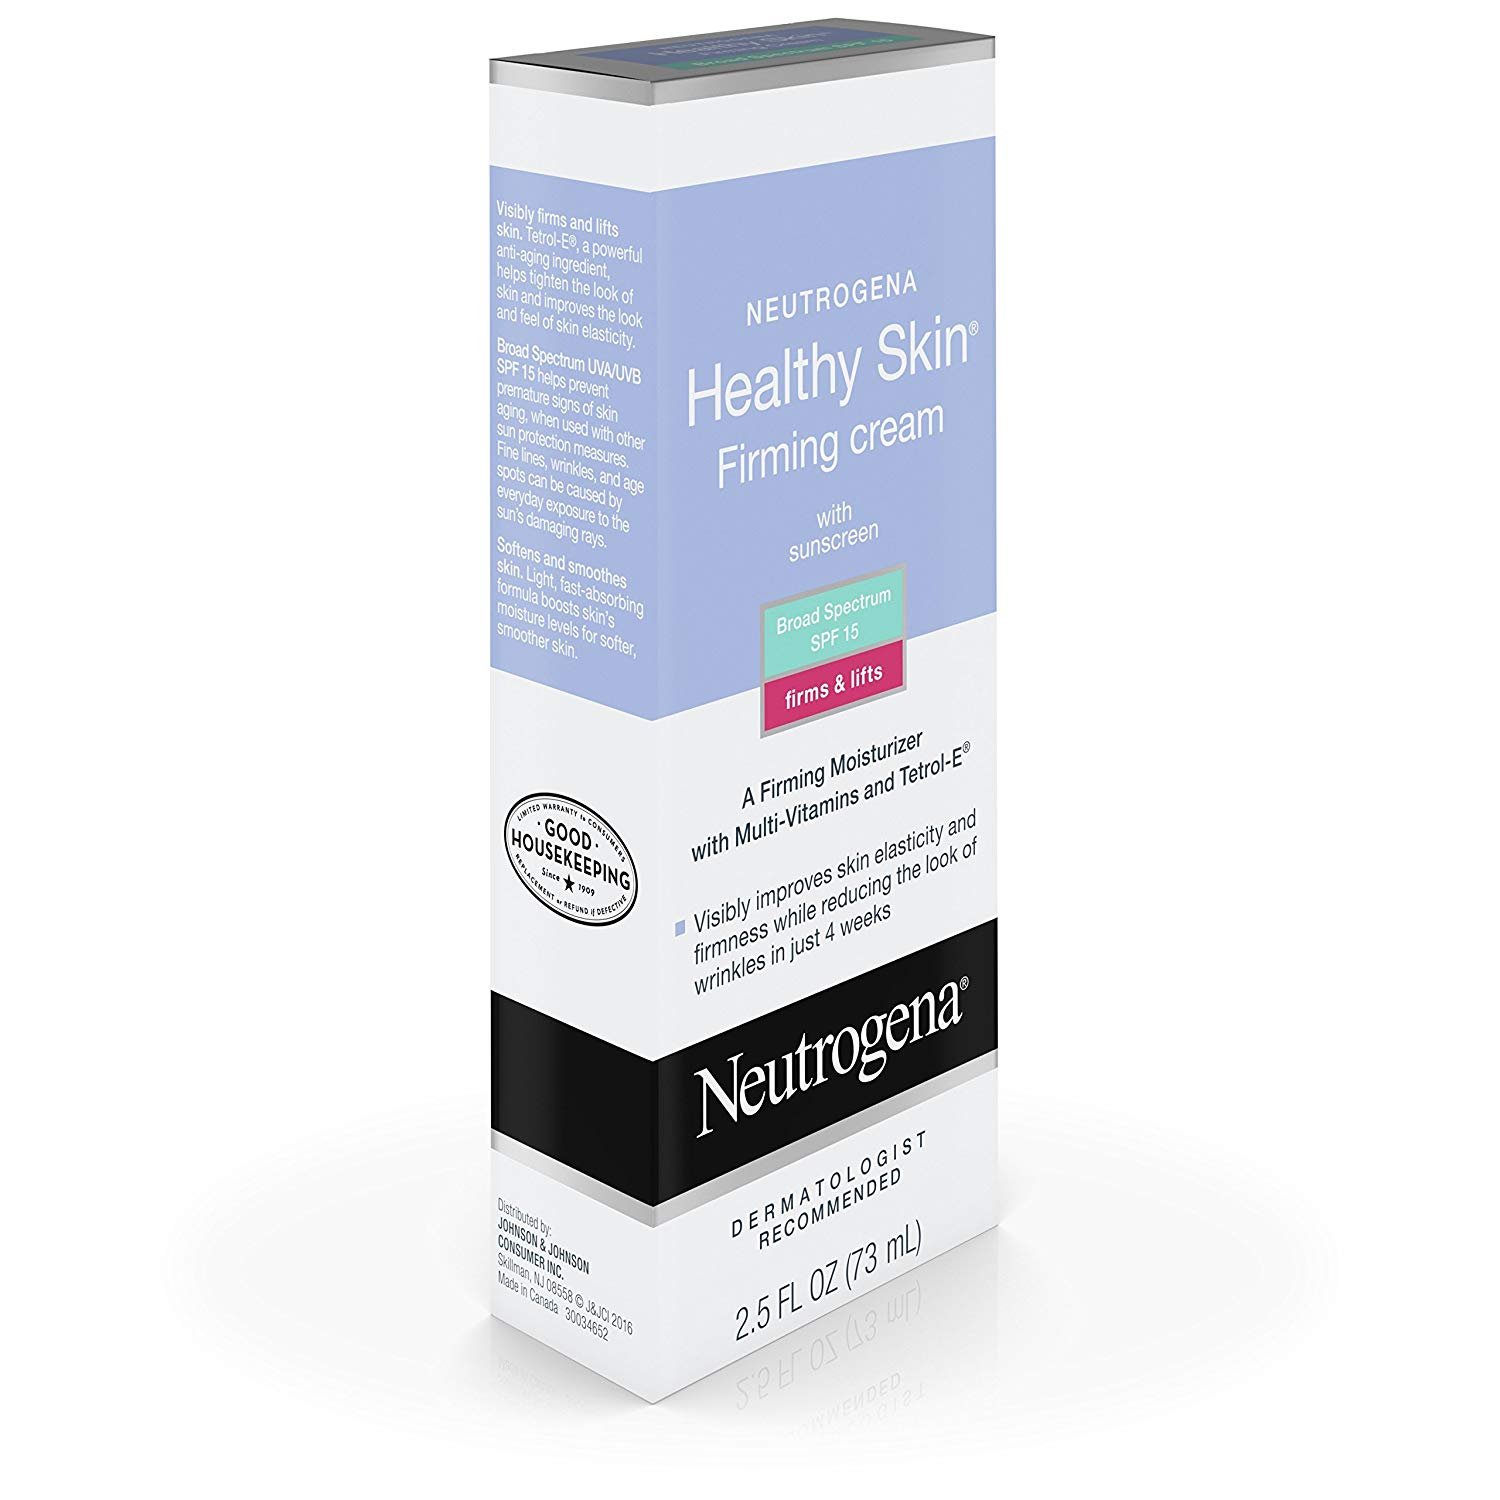 Neutrogena Healthy Skin Firming Cream with SPF 15 Sunscreen & Tetrol-E, Hypoallergenic & Non-Comedogenic Anti-Wrinkle Face Cream to Visibly Firm, Tighten & Lift Skin, 2.5 fl. oz - image 3 of 10